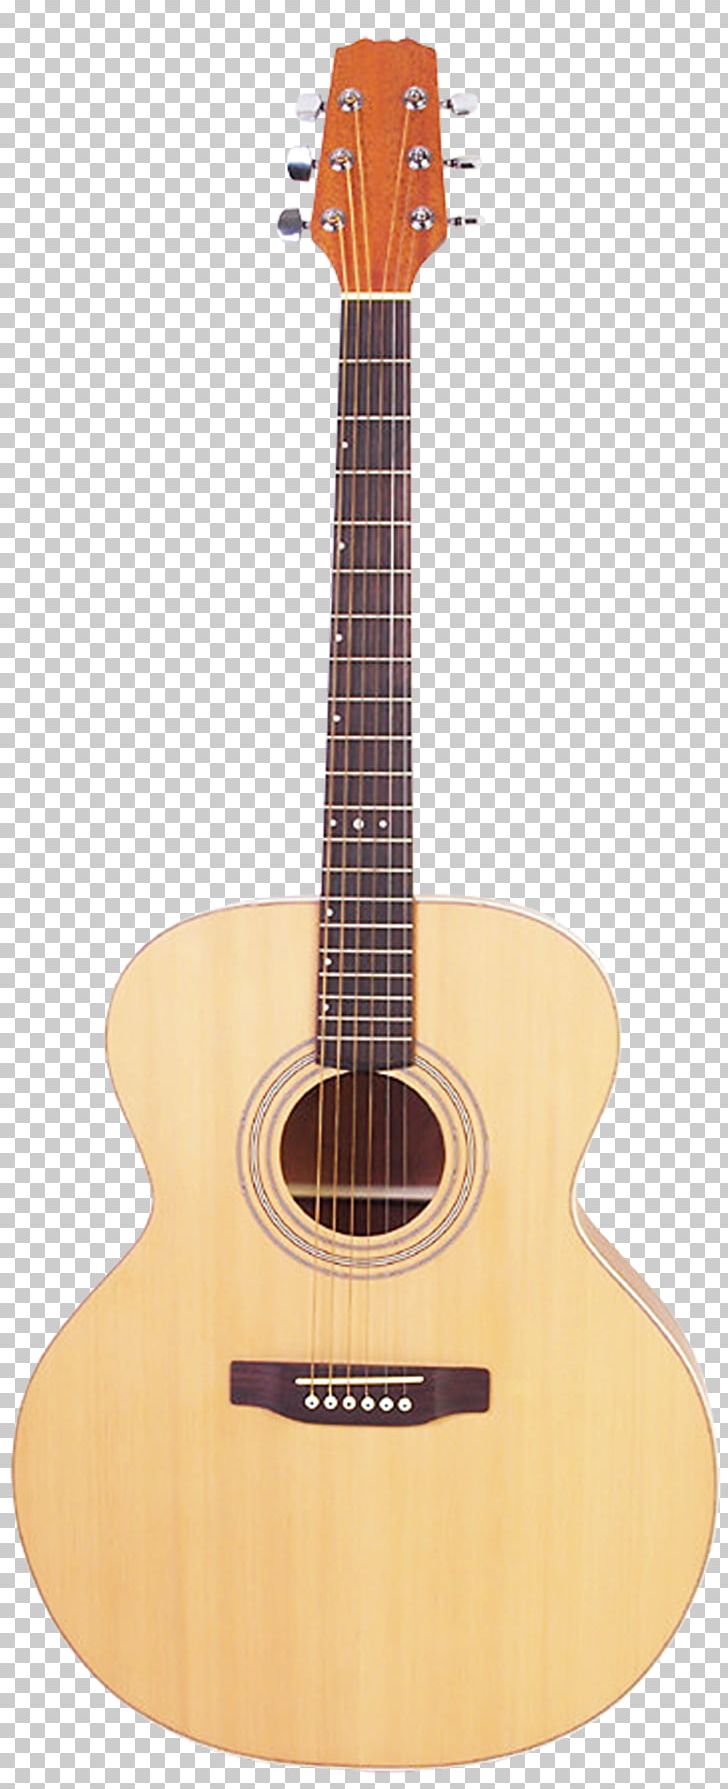 Fender Stratocaster Acoustic-electric Guitar Acoustic Guitar Classical Guitar PNG, Clipart, Classical Guitar, Cuatro, Cutaway, Guitar Accessory, Guitarist Free PNG Download